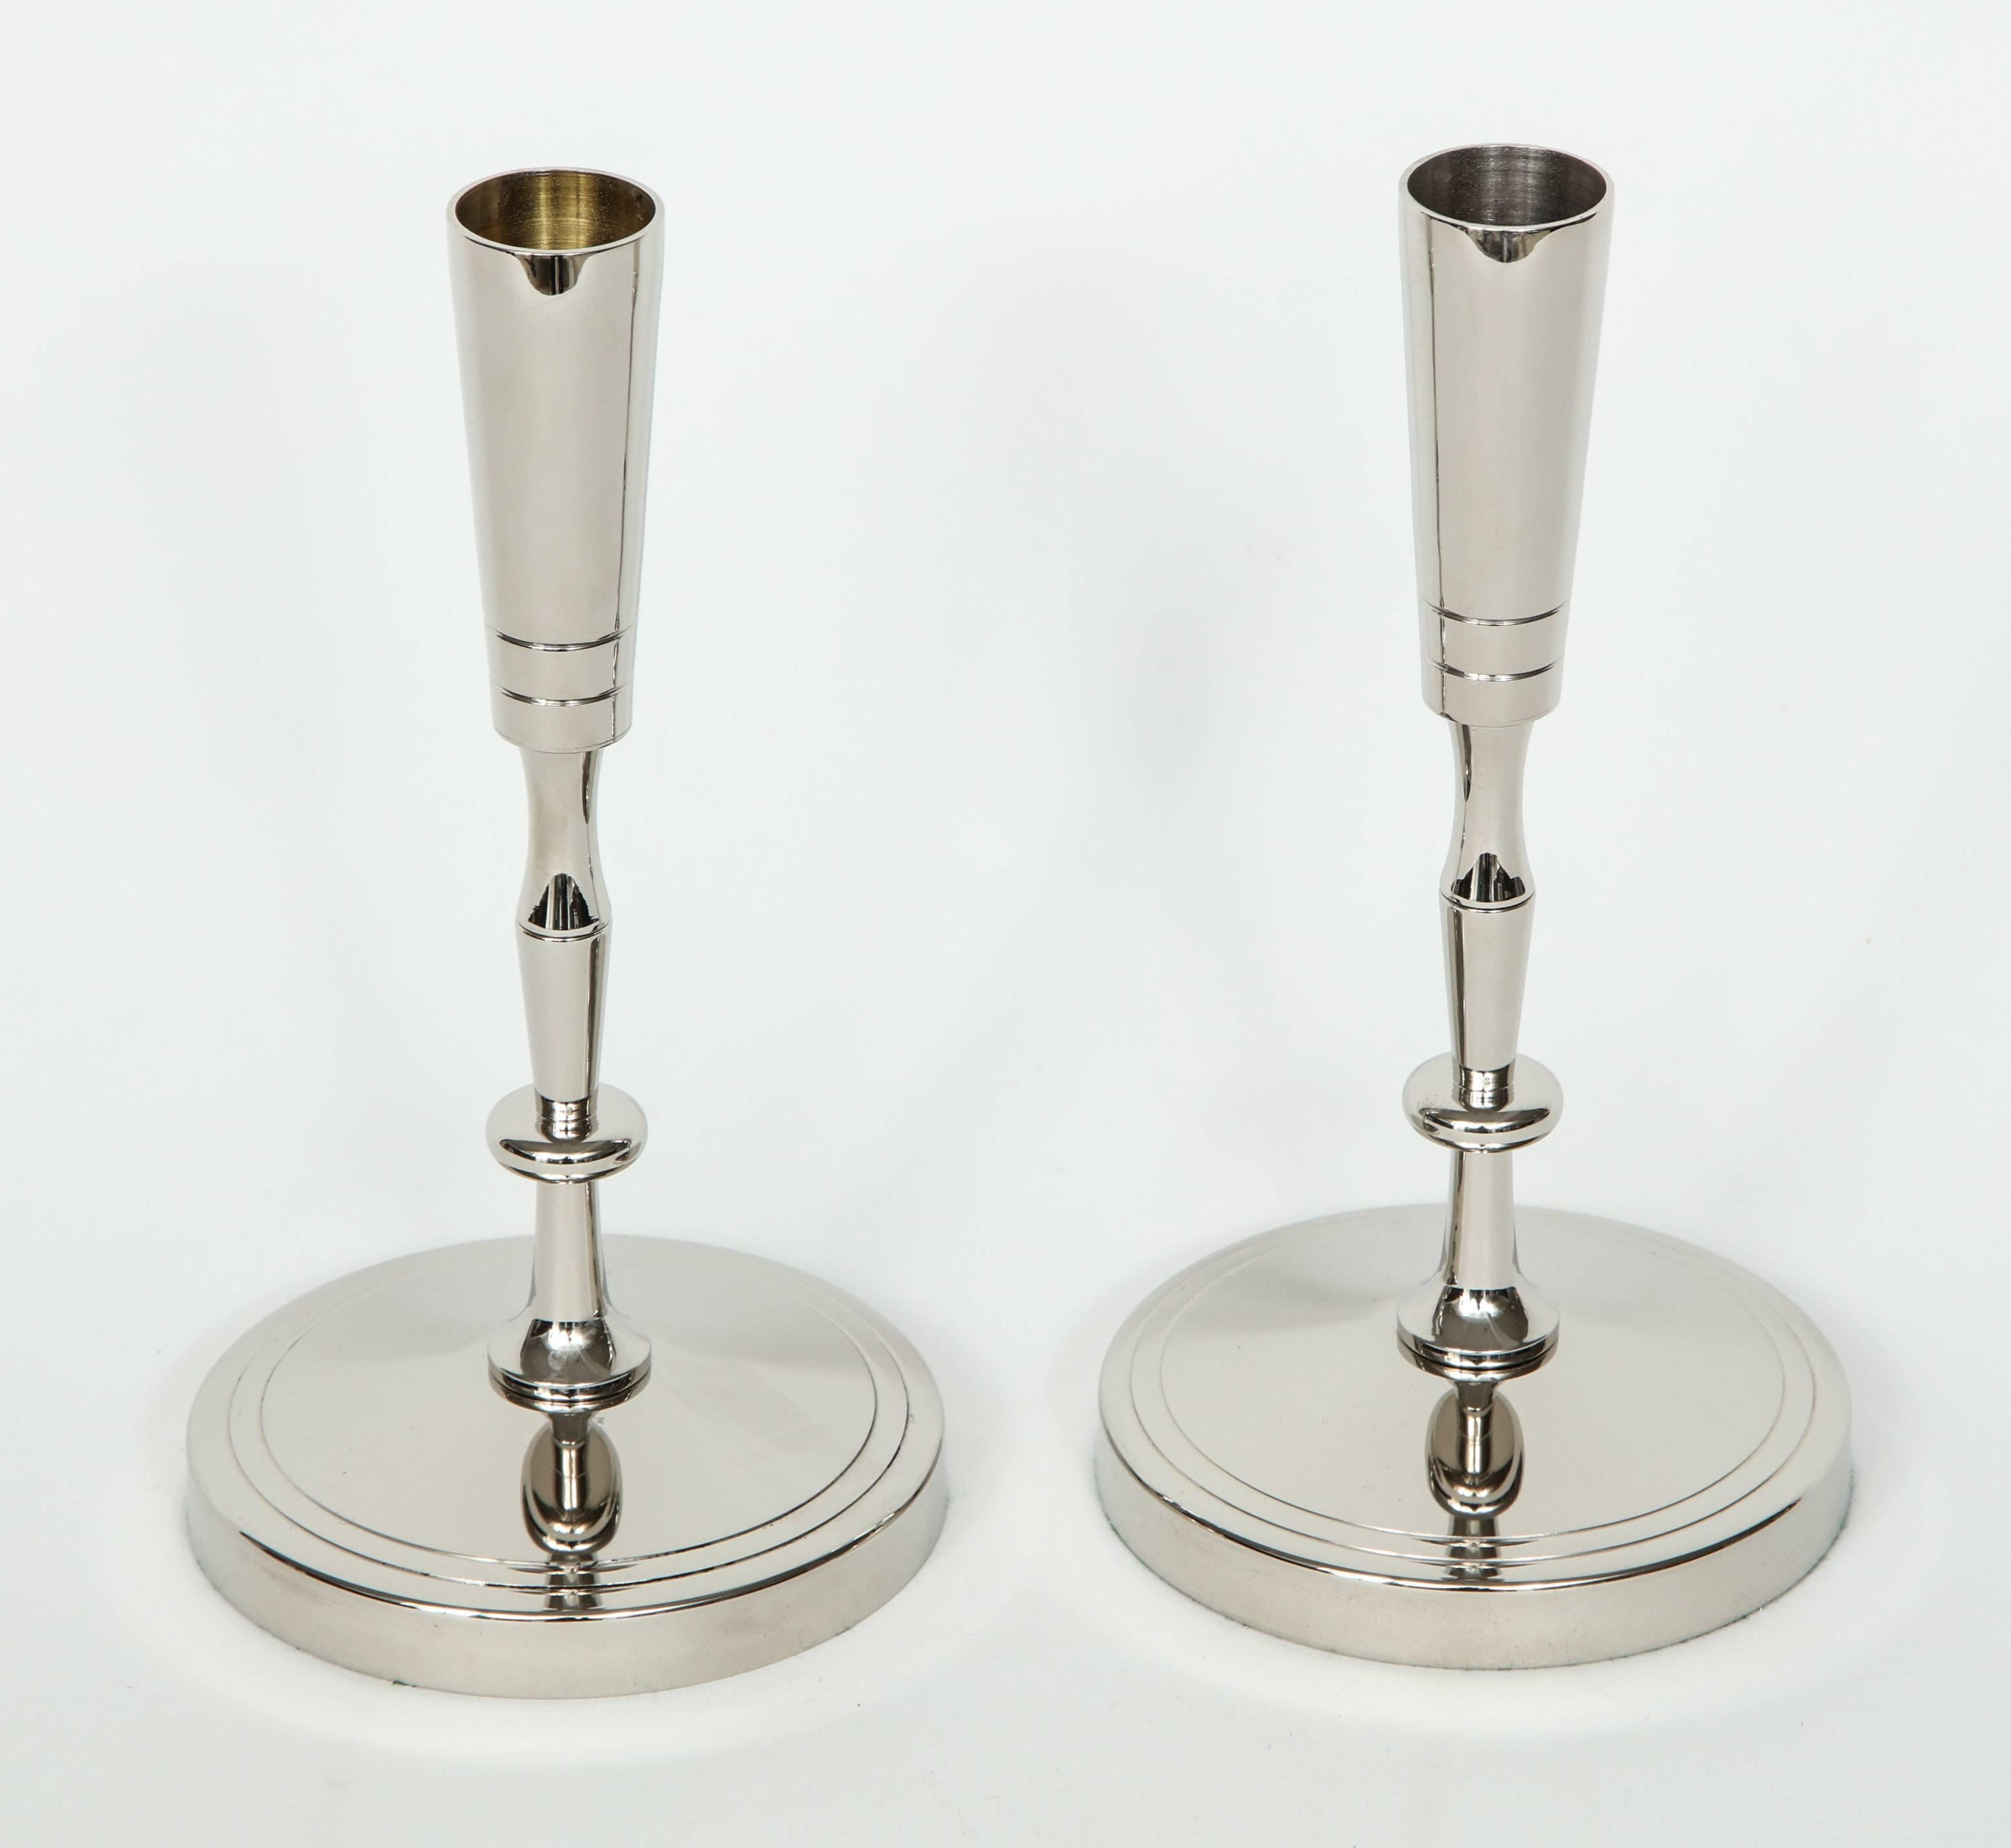 Pair of polished nickel candlesticks with a circular base and sinuous stem designed by Tommi Parzinger for Dorlyn.